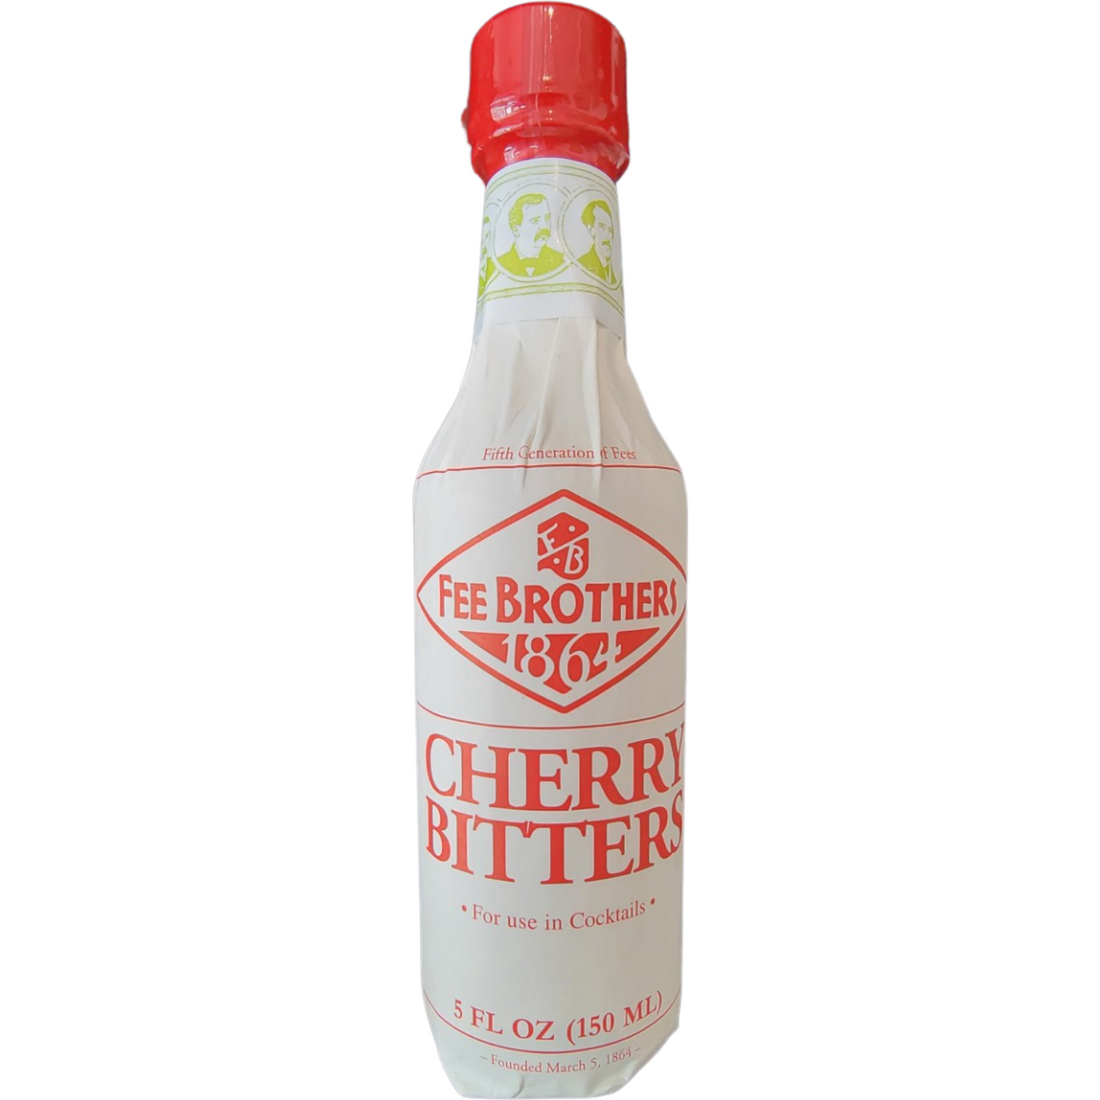 Cherry Bitters- Fee Brothers